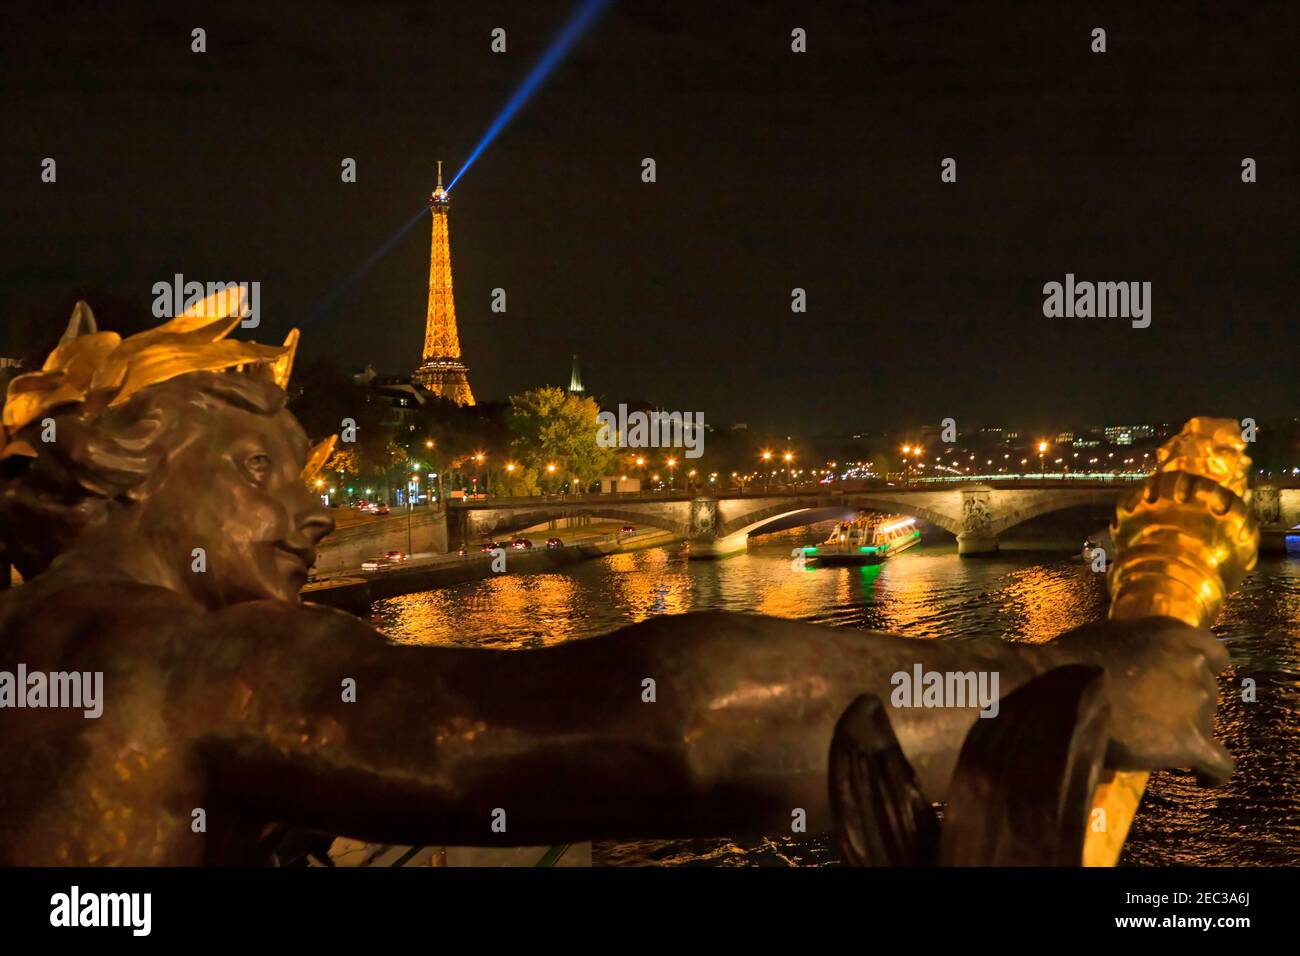 Eiffel Tower and the Seine River from Pont Alexandre III at night, Paris, France Stock Photo